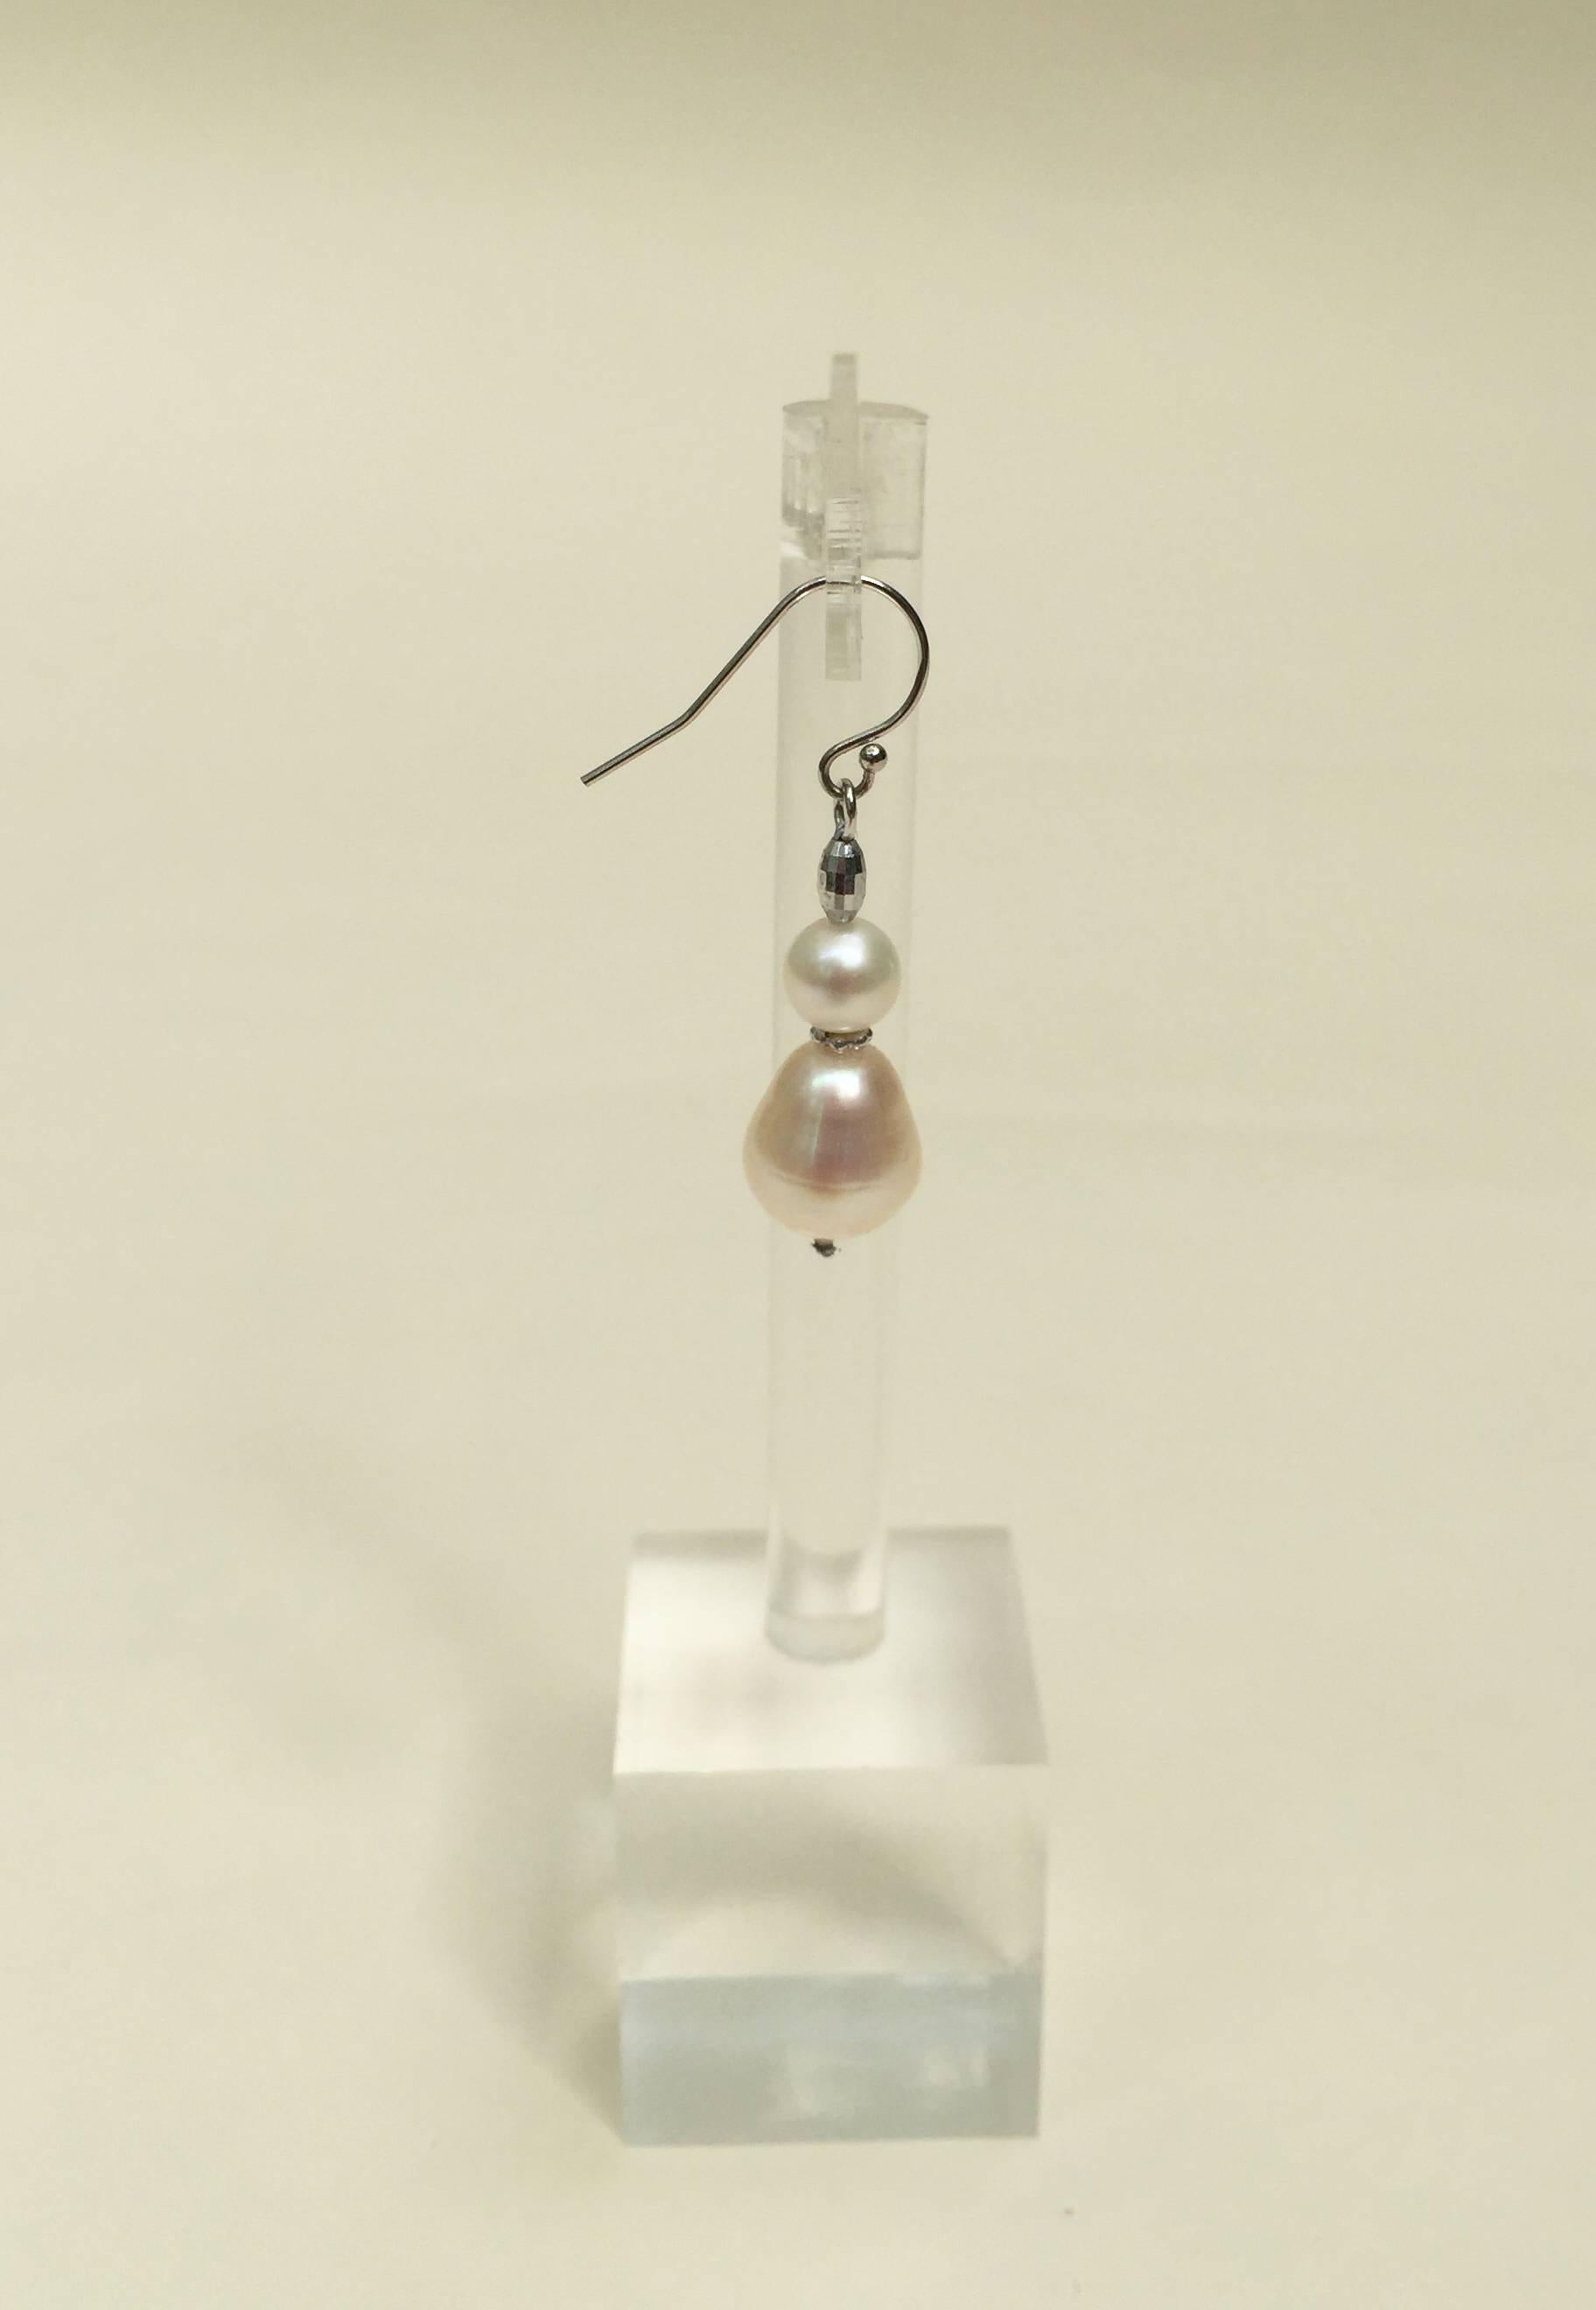 These double pearl earrings are classic and elegant, highlighted with a platinum plated silver beads separating the pearls. The 14k white gold hook completes these timeless earrings. 
As part of a set, with the graduated pearl drape necklace these